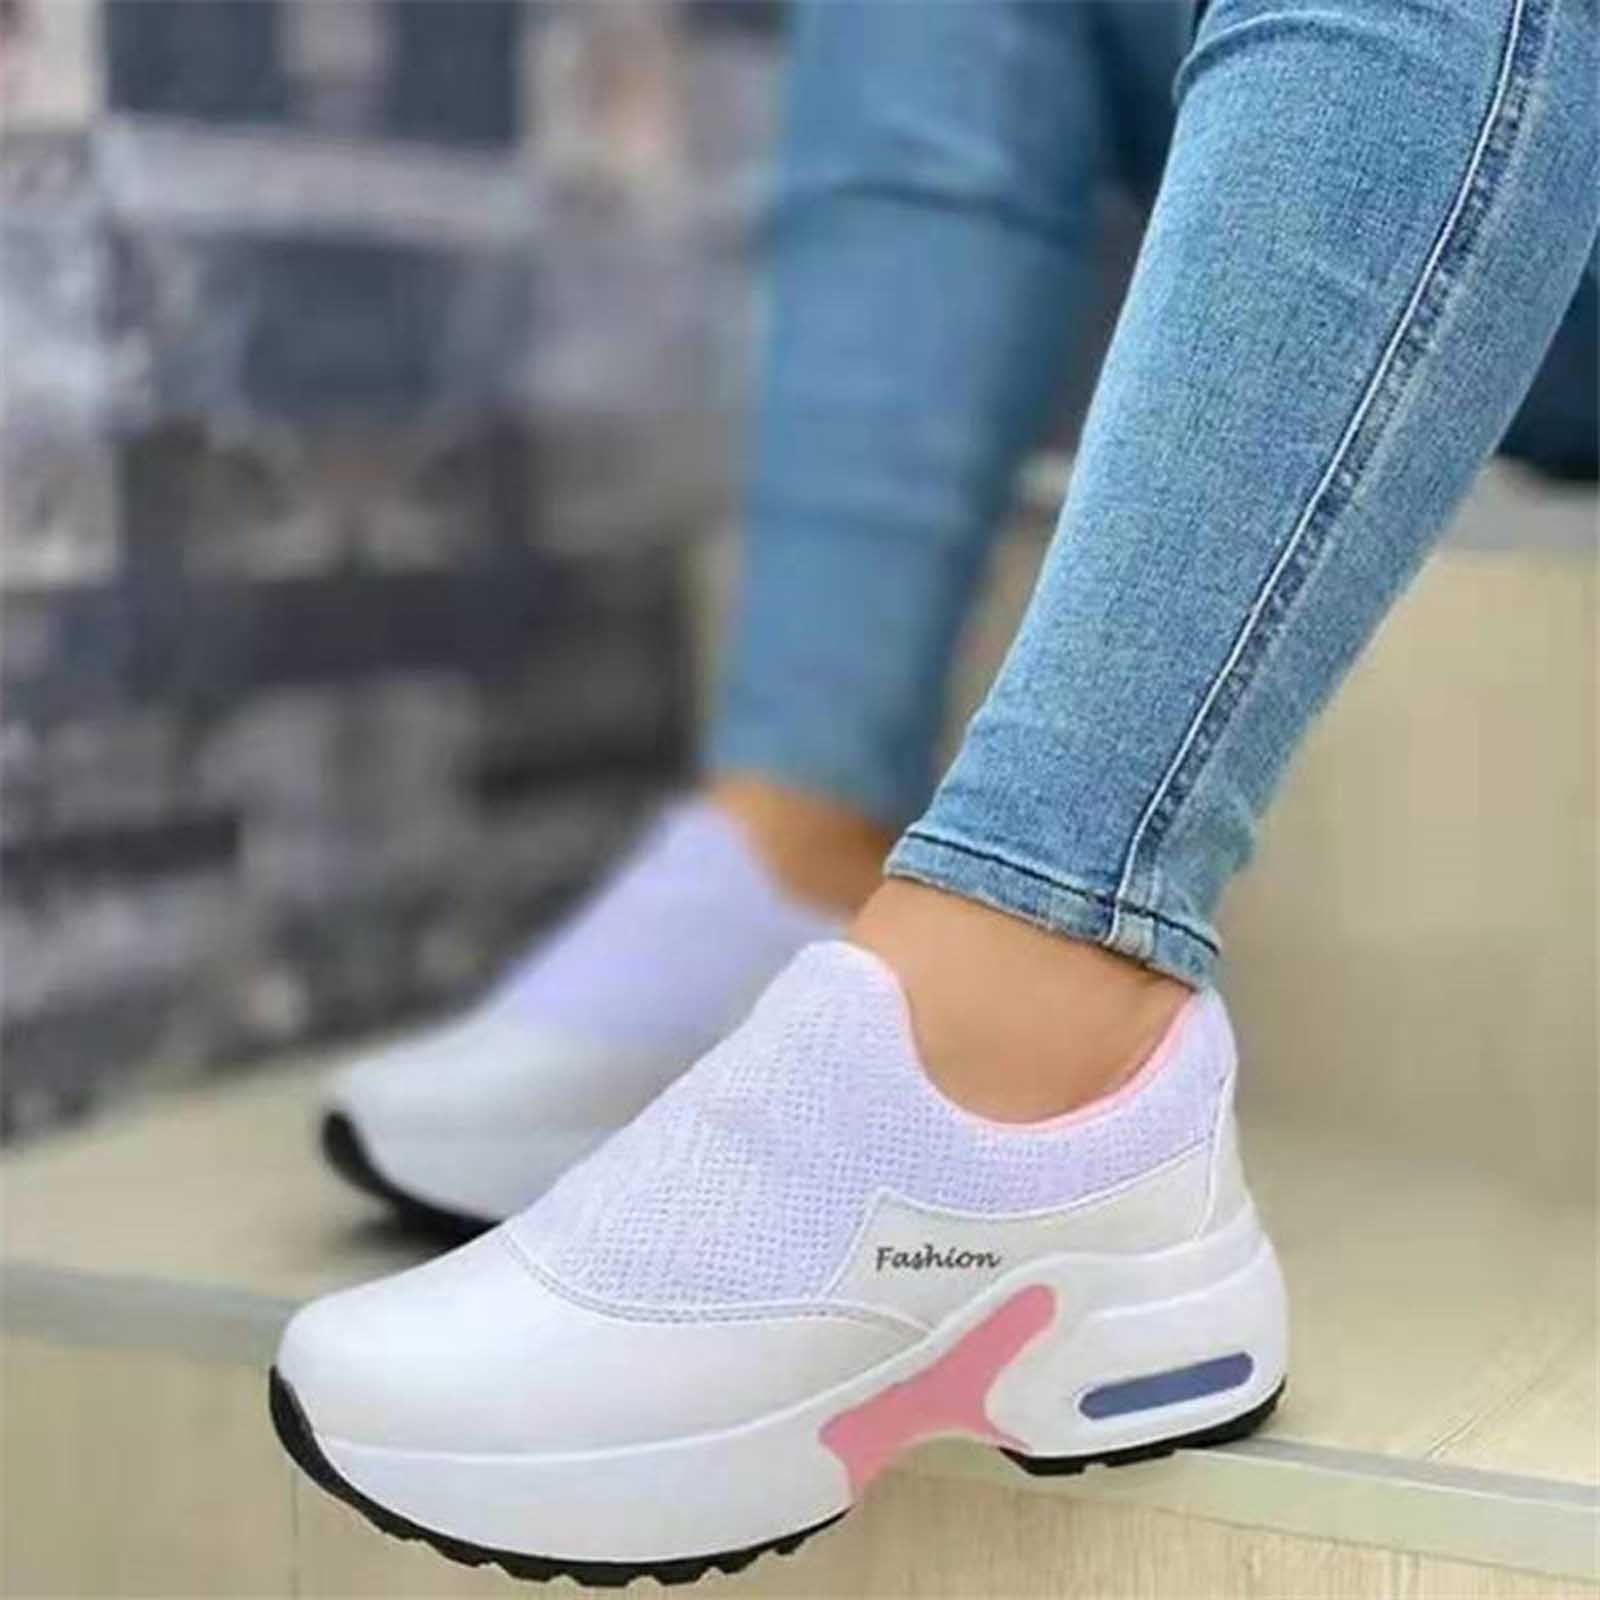 AXXD Fall Autumn Outdoor Just So So Shoes Women's Sneakers Shock Resistant Running Girl Ladies Slouch Shoes For Price -